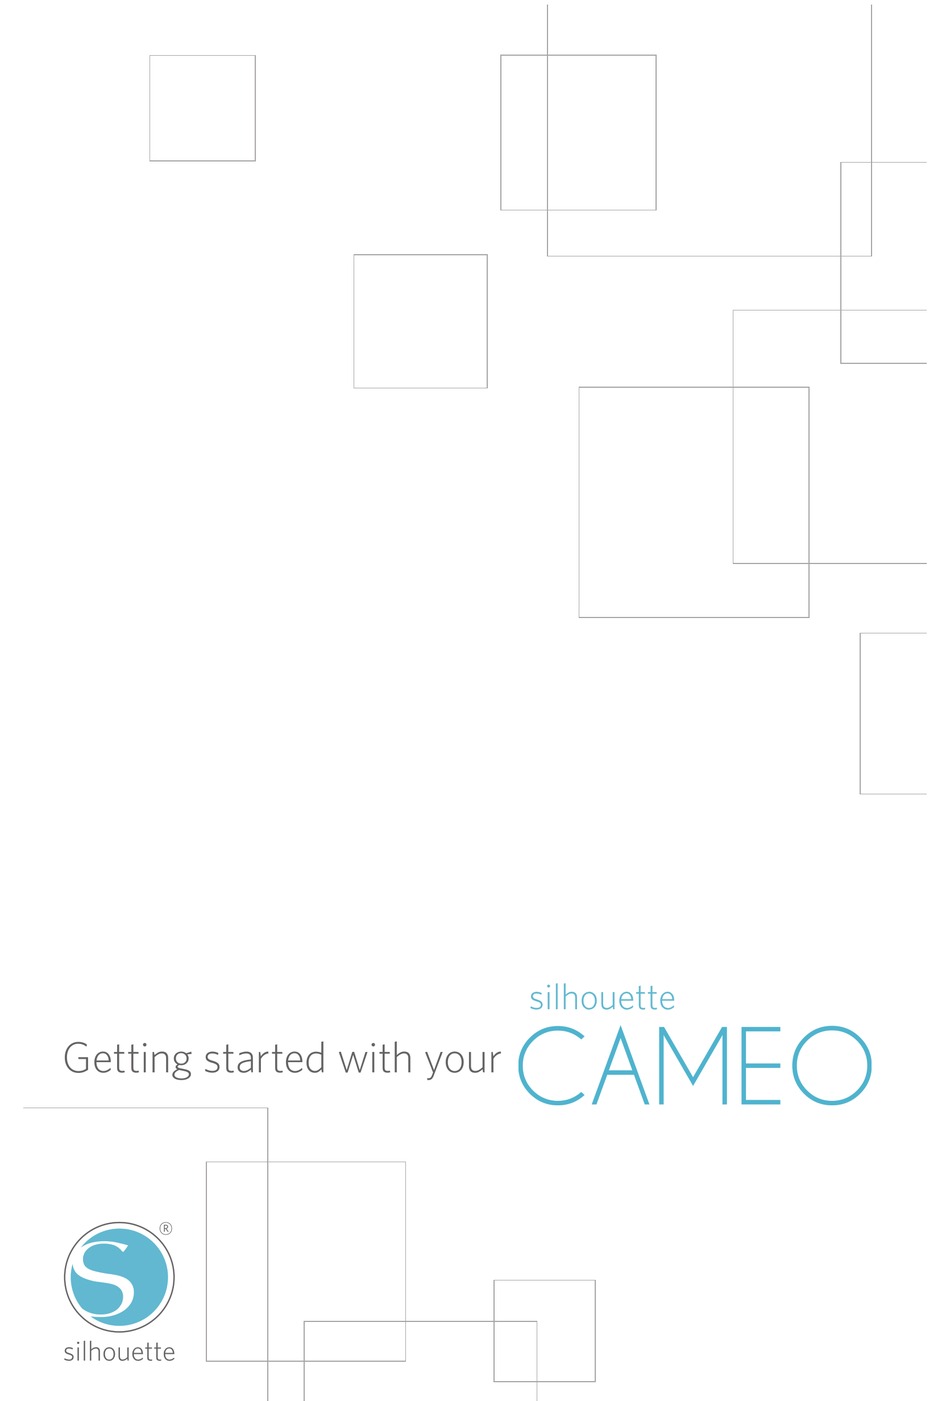 how to install bullzip pdf printer to silhouette cameo